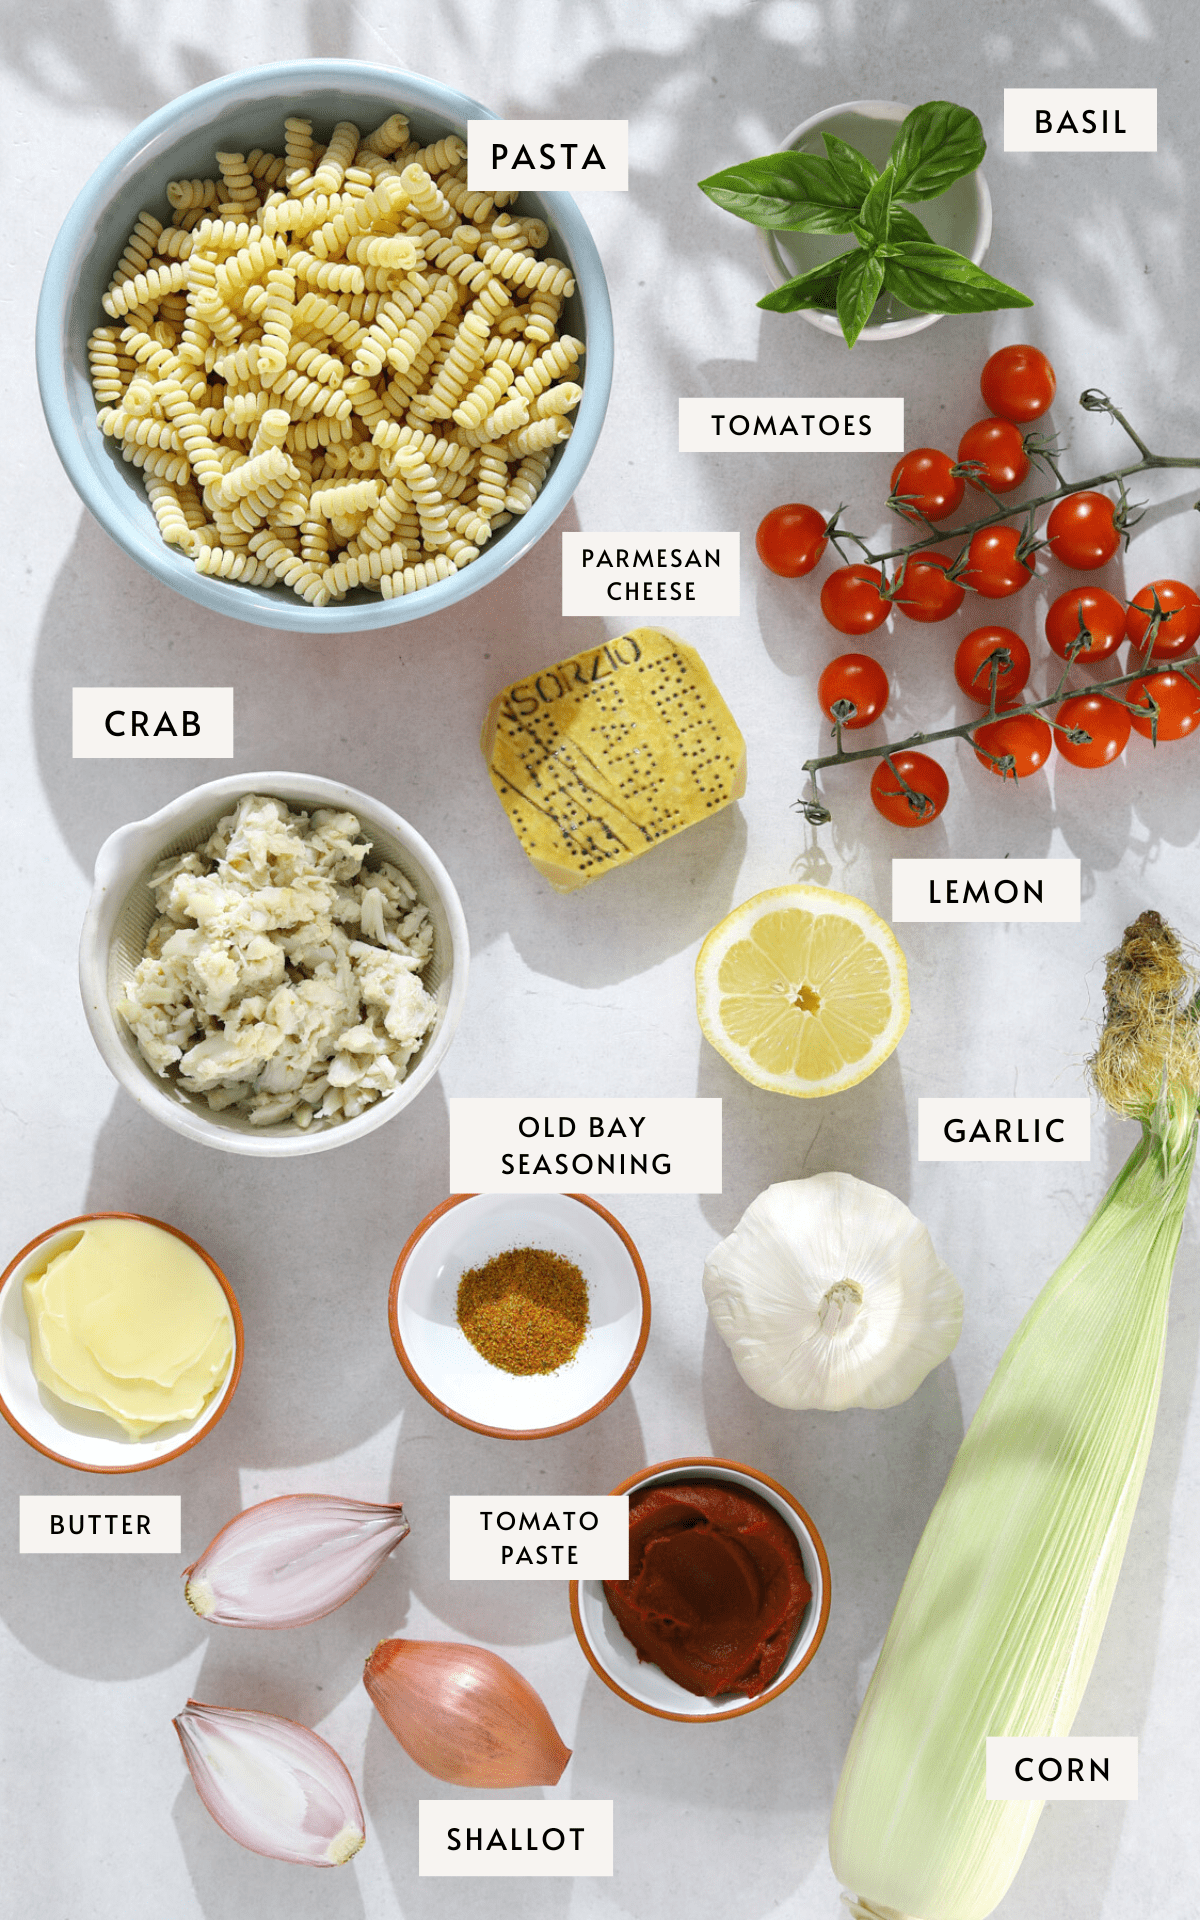 Recipe ingredients portioned into small bowls; picked crab meat, short-cut pasta, basil leaves, cherry tomatoes, paprika, tomato paste, halved shallots and a whole ear of corn.